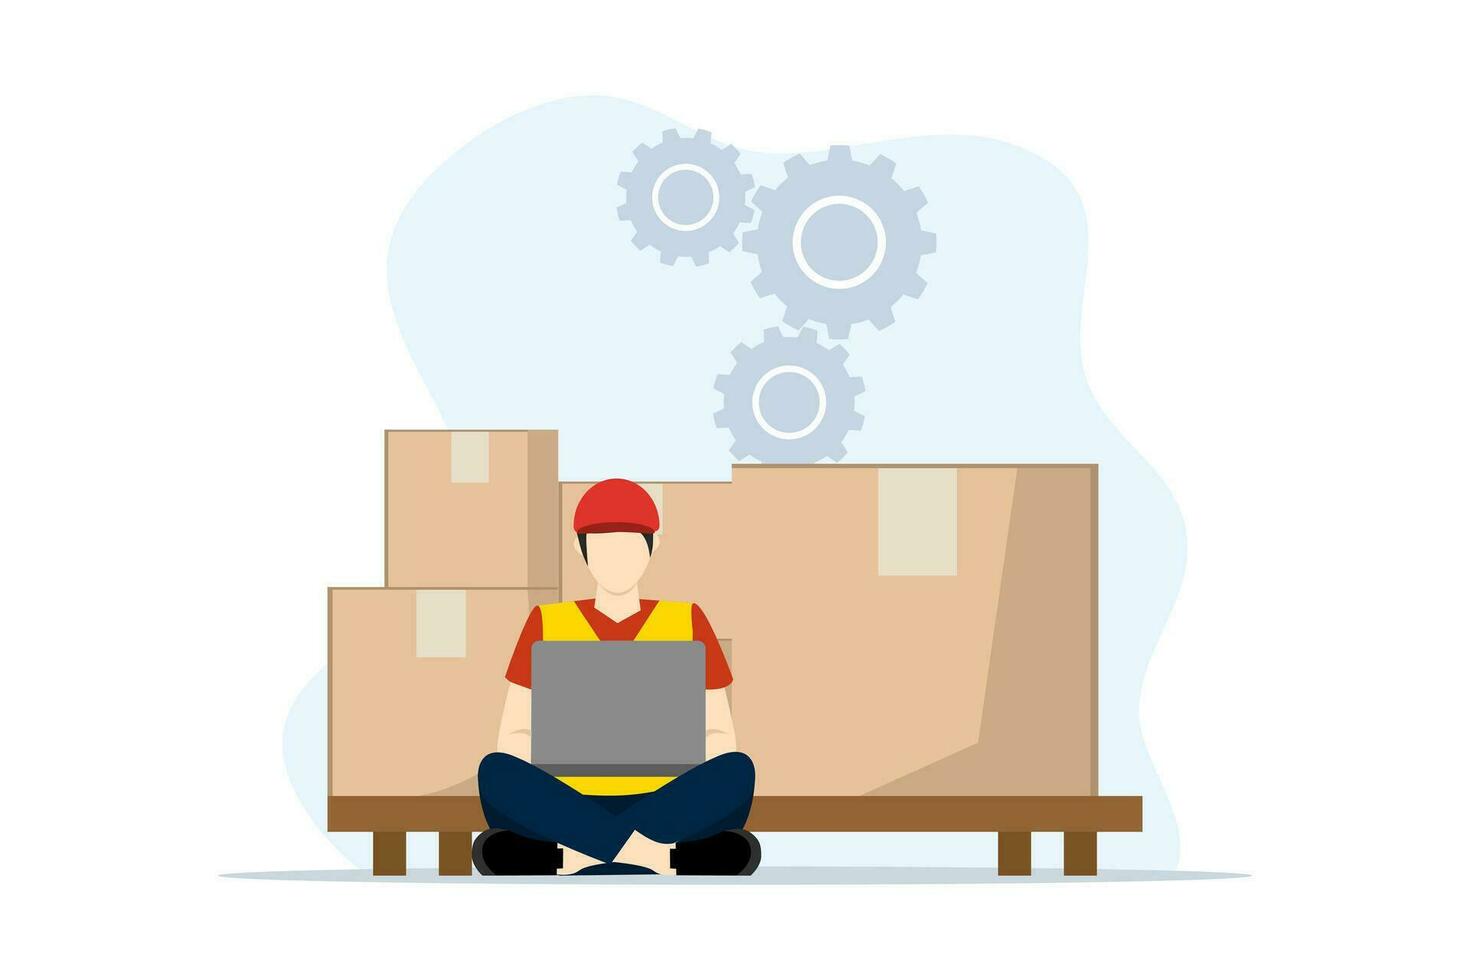 Logistics management monitoring concept. Smart warehouse management system. manager in warehouse monitors with laptop inventory level of goods on shelves. flat vector illustration on background.